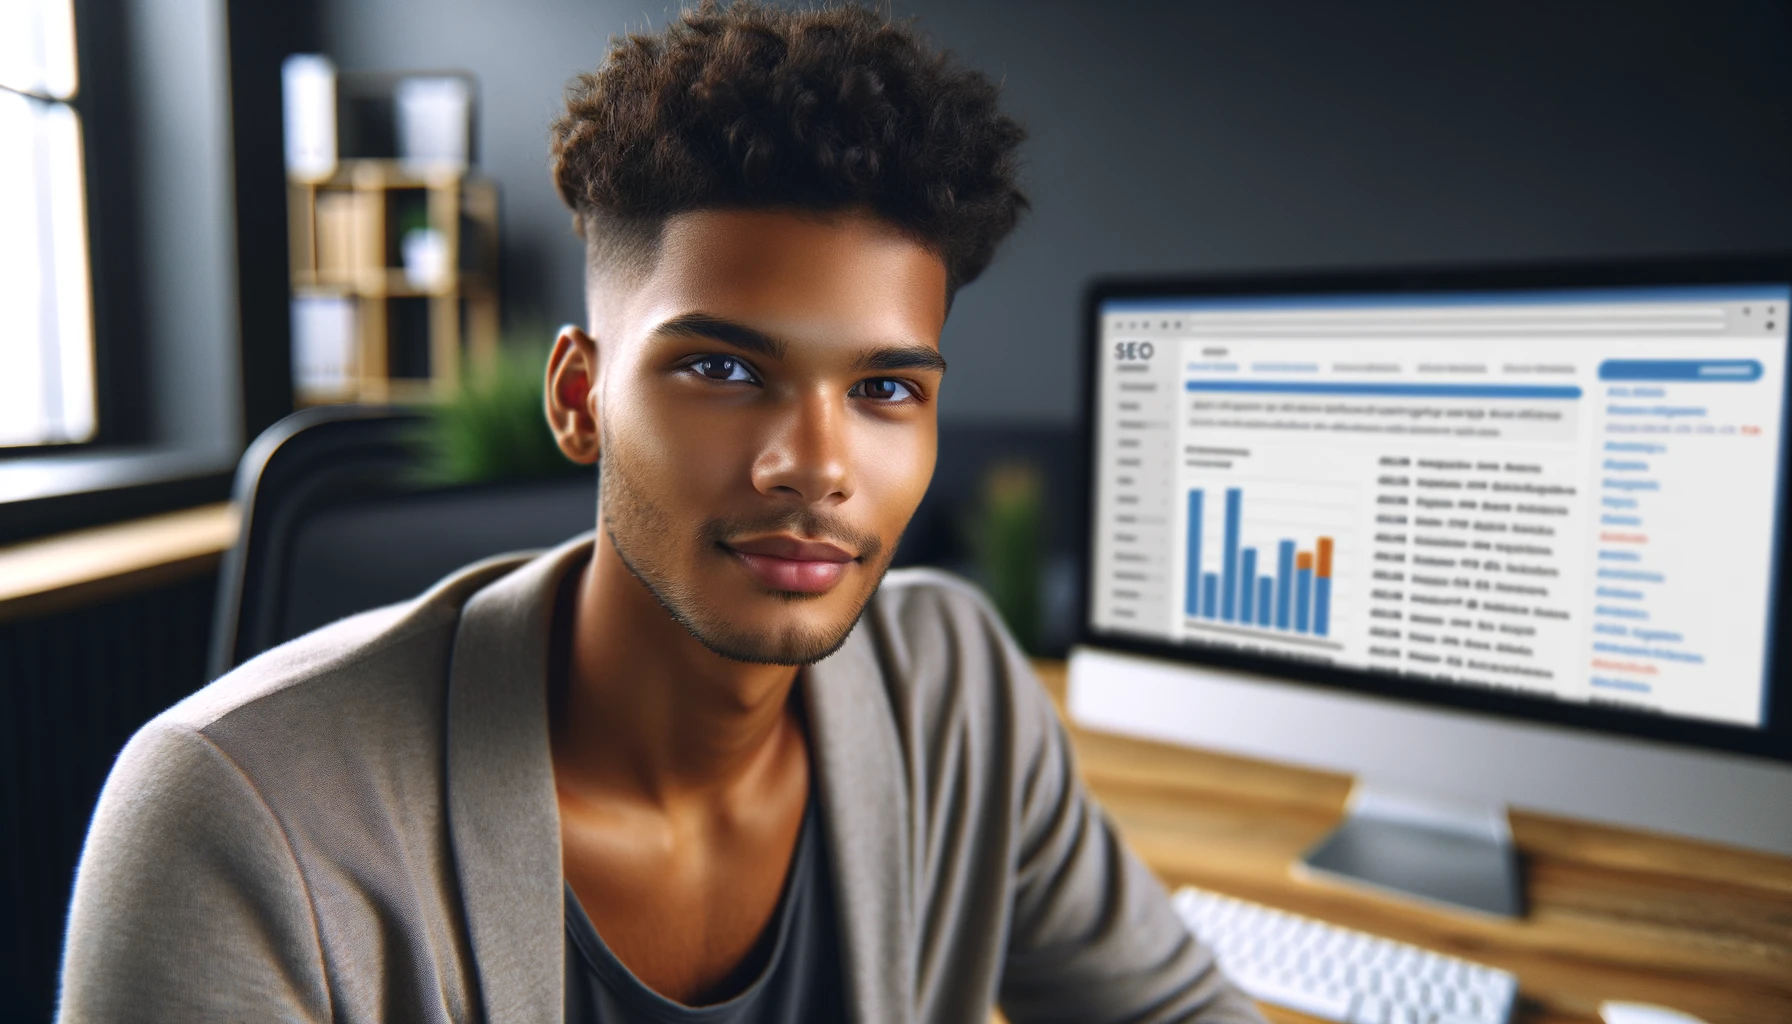 A mixed-race young man with short, naturally styled hair and an engaging expression is sitting in a modern office space, looking directly at the camera. He is analyzing a website using SEO tools on his computer, which displays a screen filled with keyword rankings and other SEO metrics. His demeanor reflects professionalism and focus in his digital marketing work. The scene is photorealistic, capturing him in a comfortable and professional office environment.